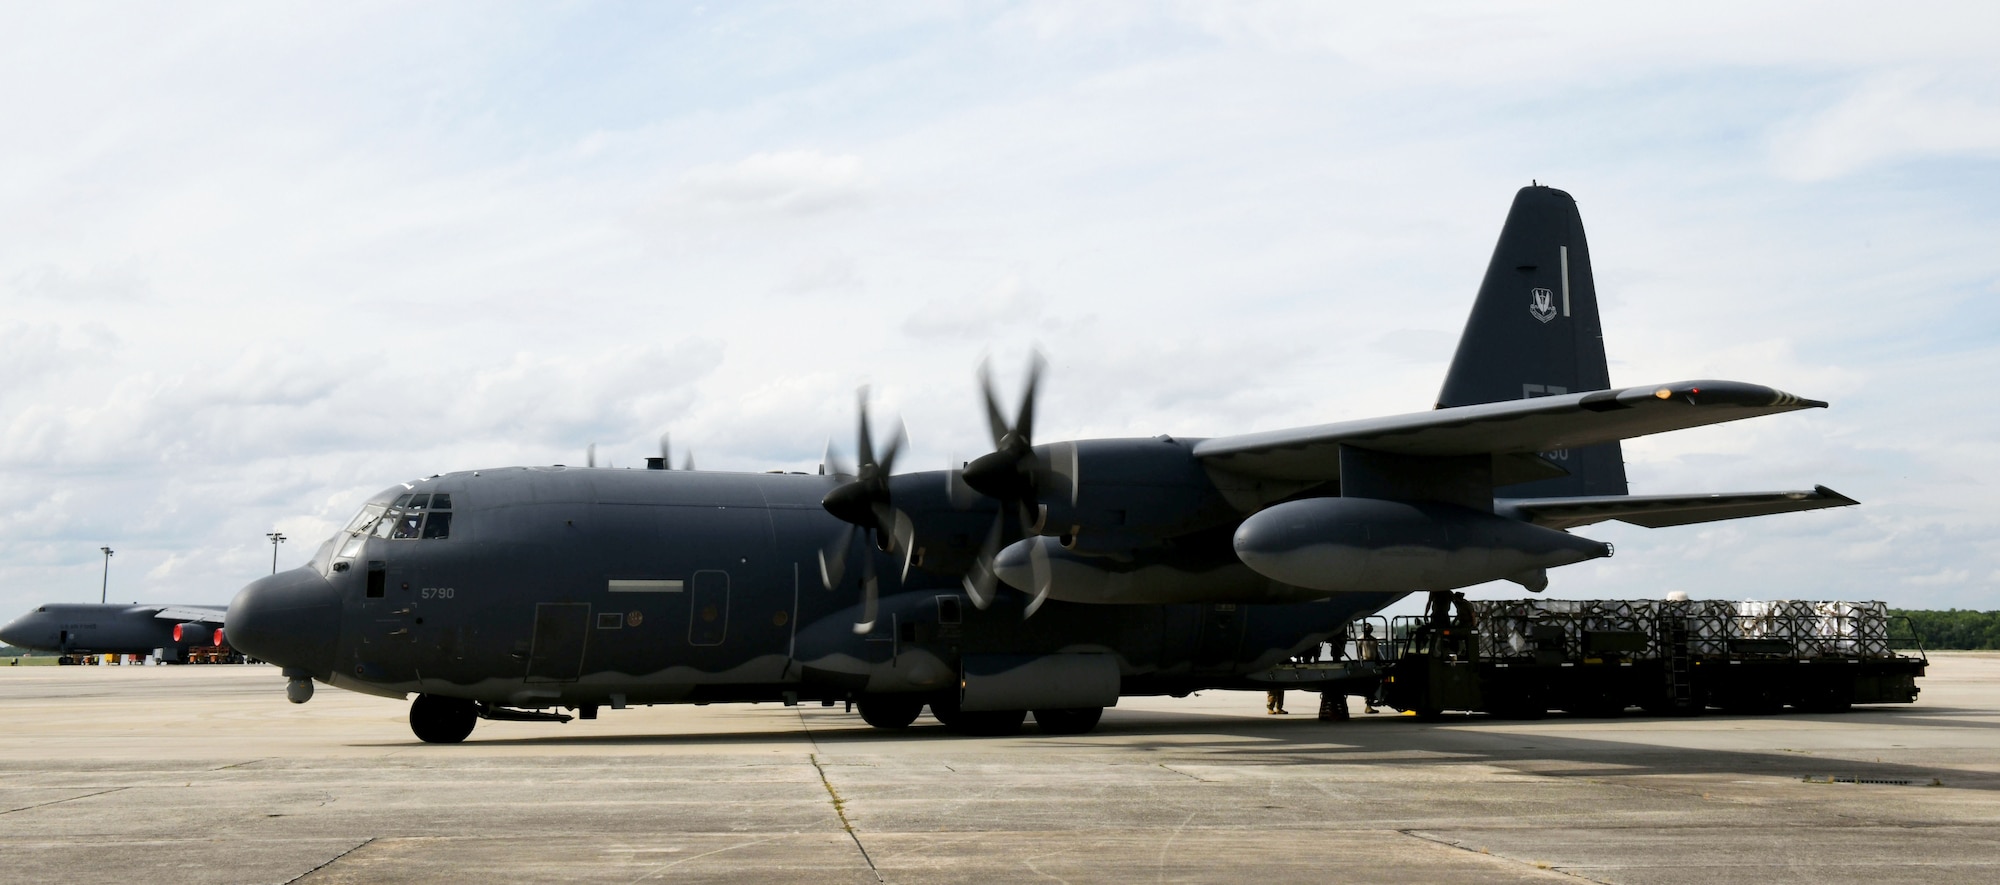 Photo shows C-130 aircraft with truck behind the cargo end of the plane containing pallets with buckets.